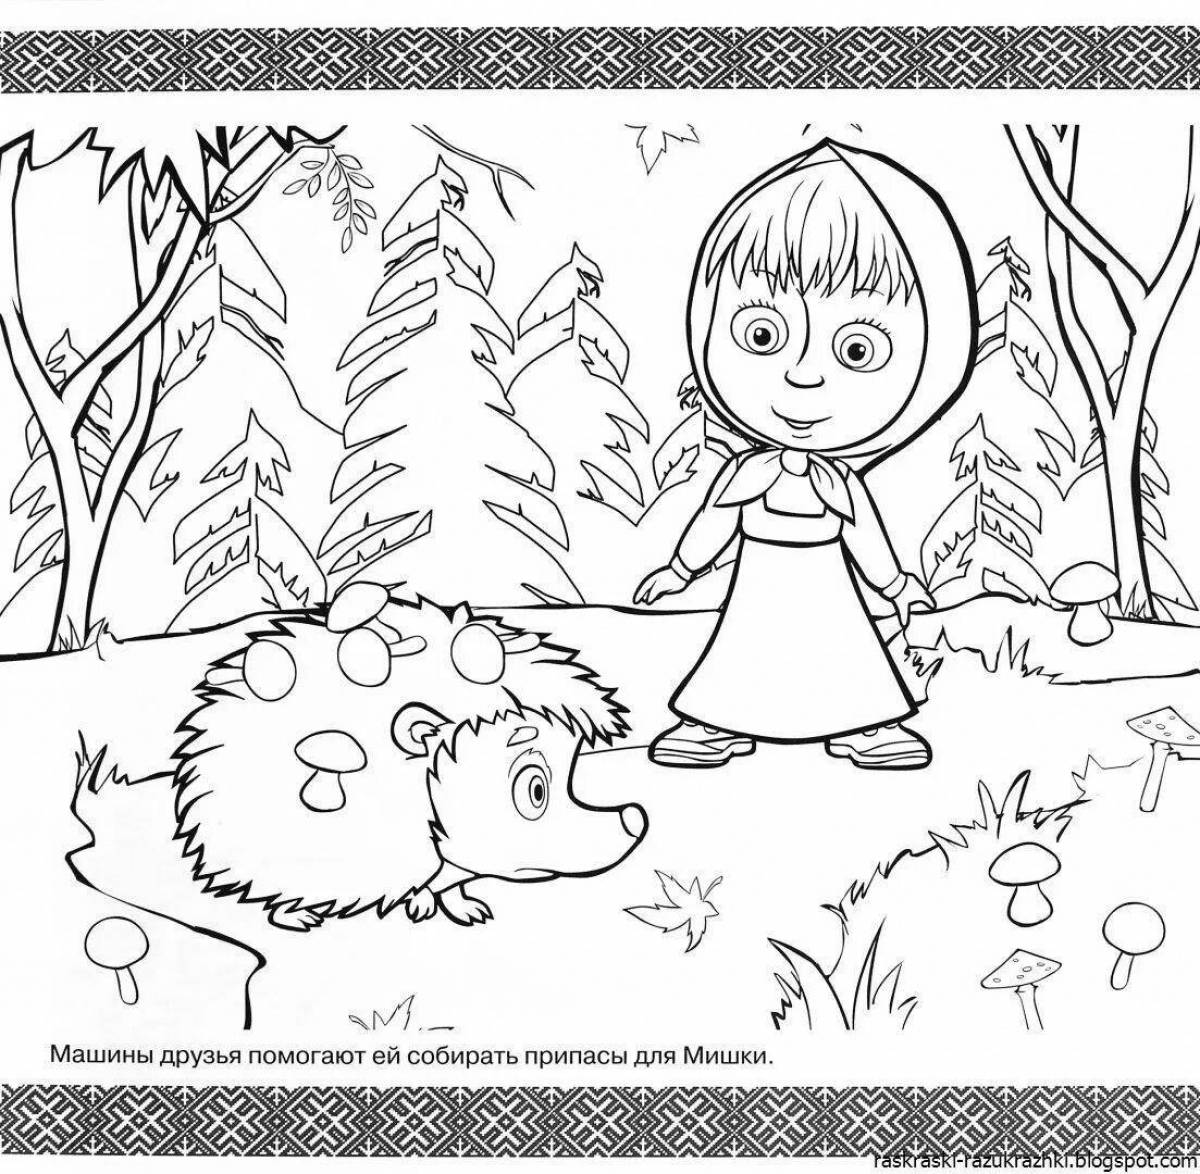 Live Masha and the bear coloring book